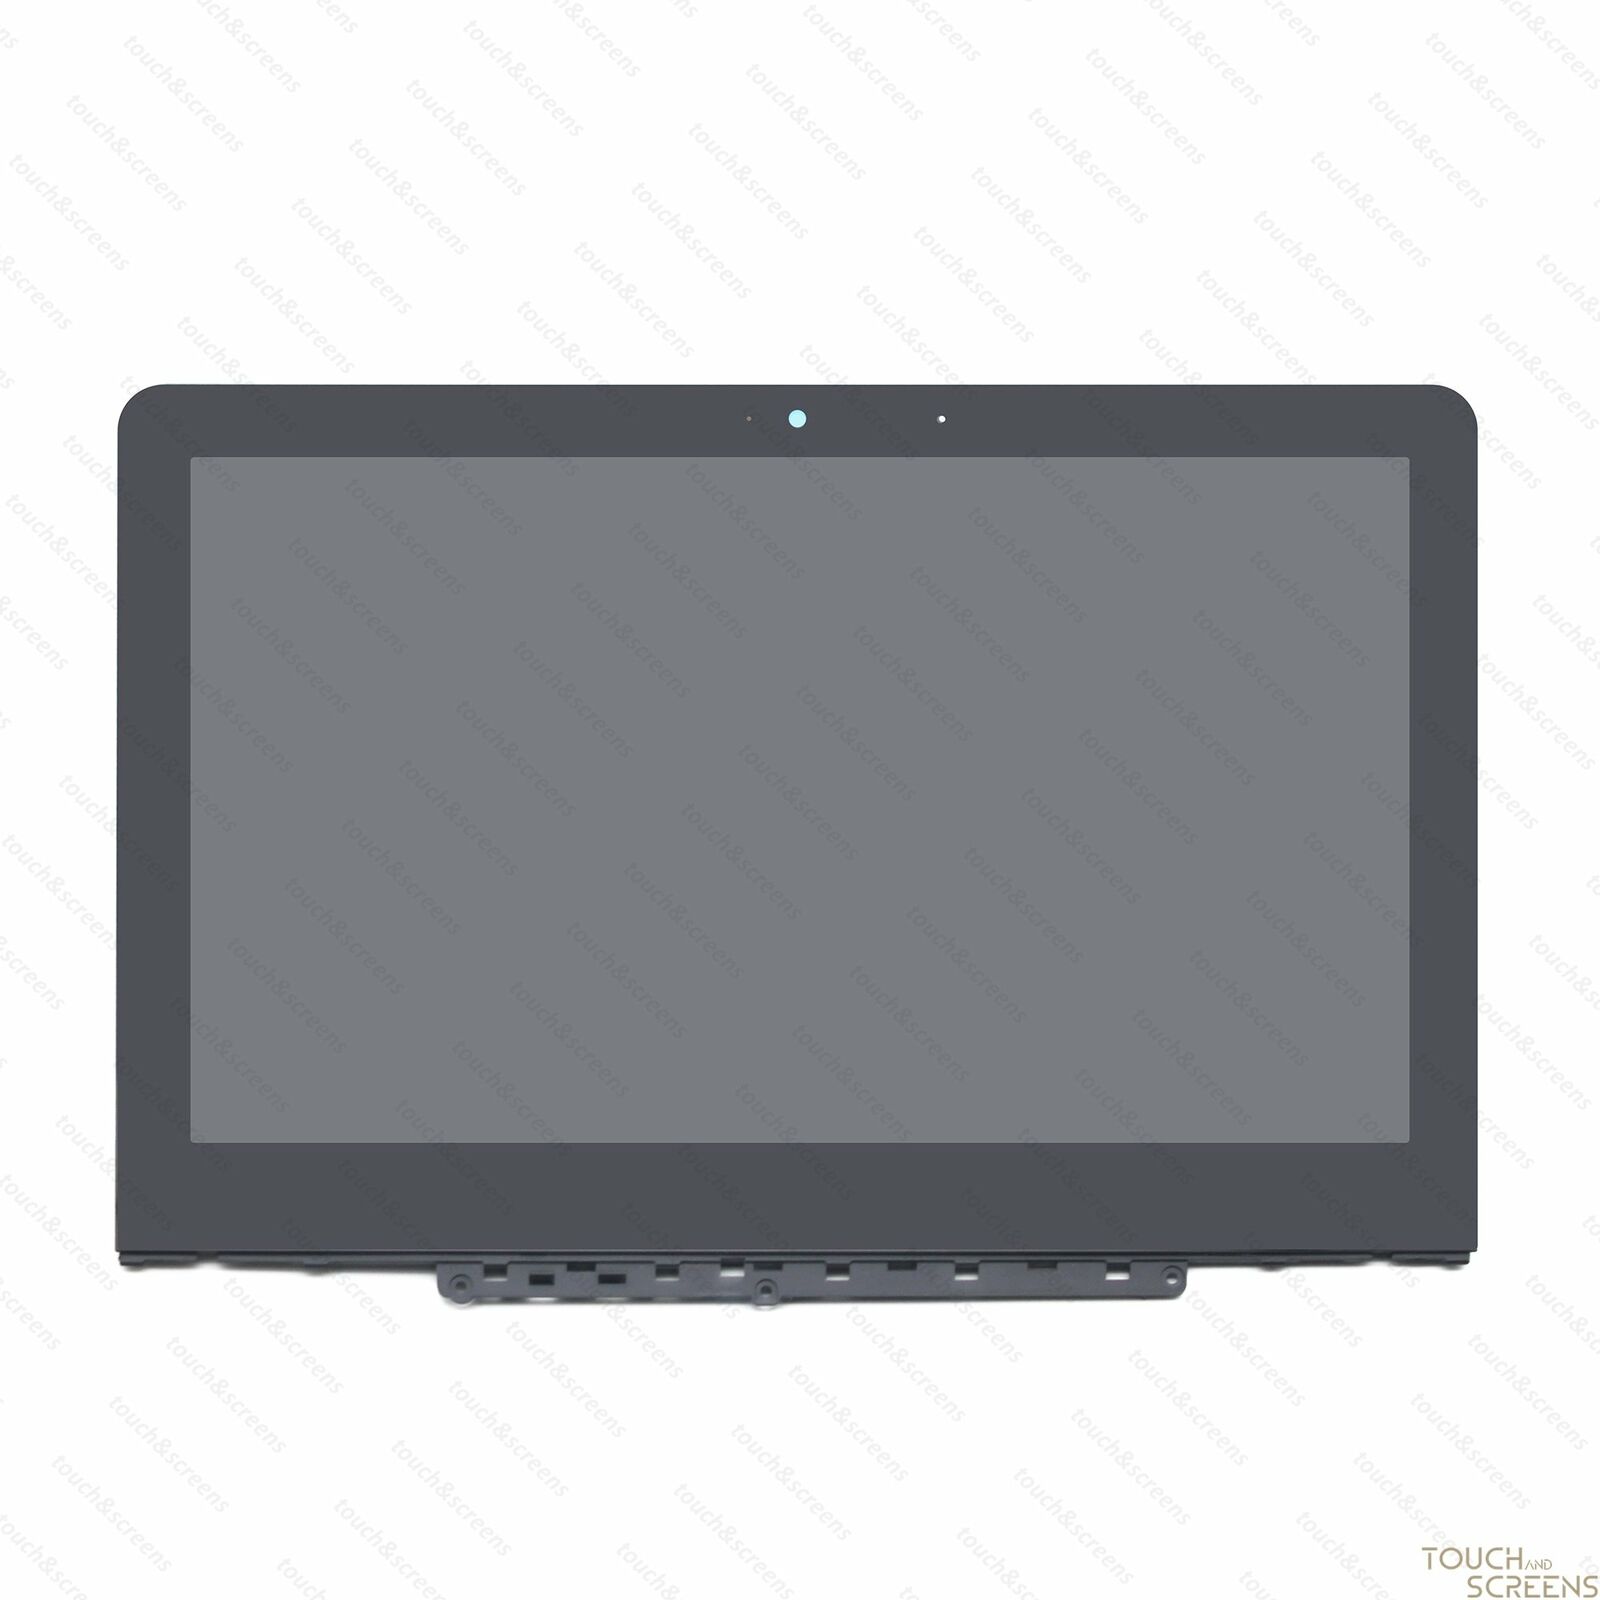 LCD Touchscreen Digitizer Display Panel for Lenovo 500e Chromebook 81ES0007US